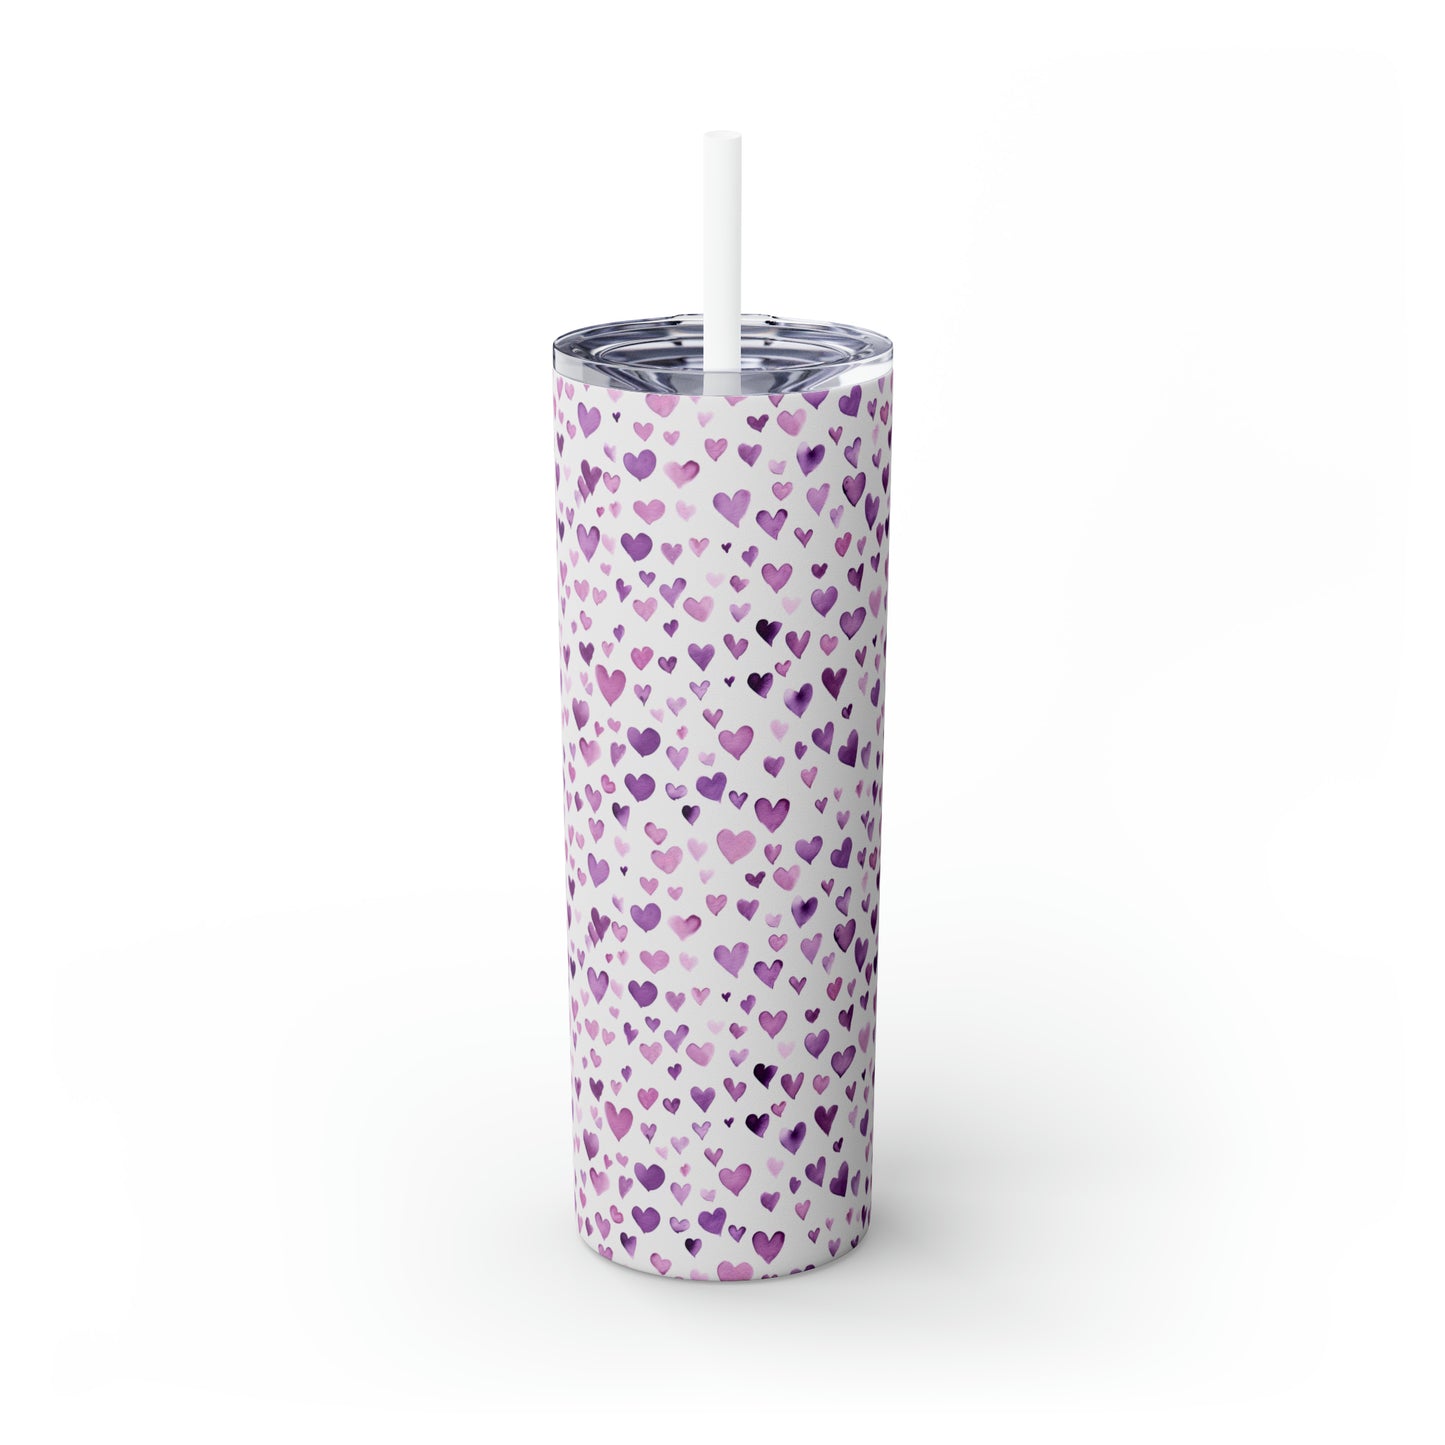 Mini Love Hearts - Purple Floating Hearts - Skinny Tumbler with Straw, 20oz - Stainless Steel